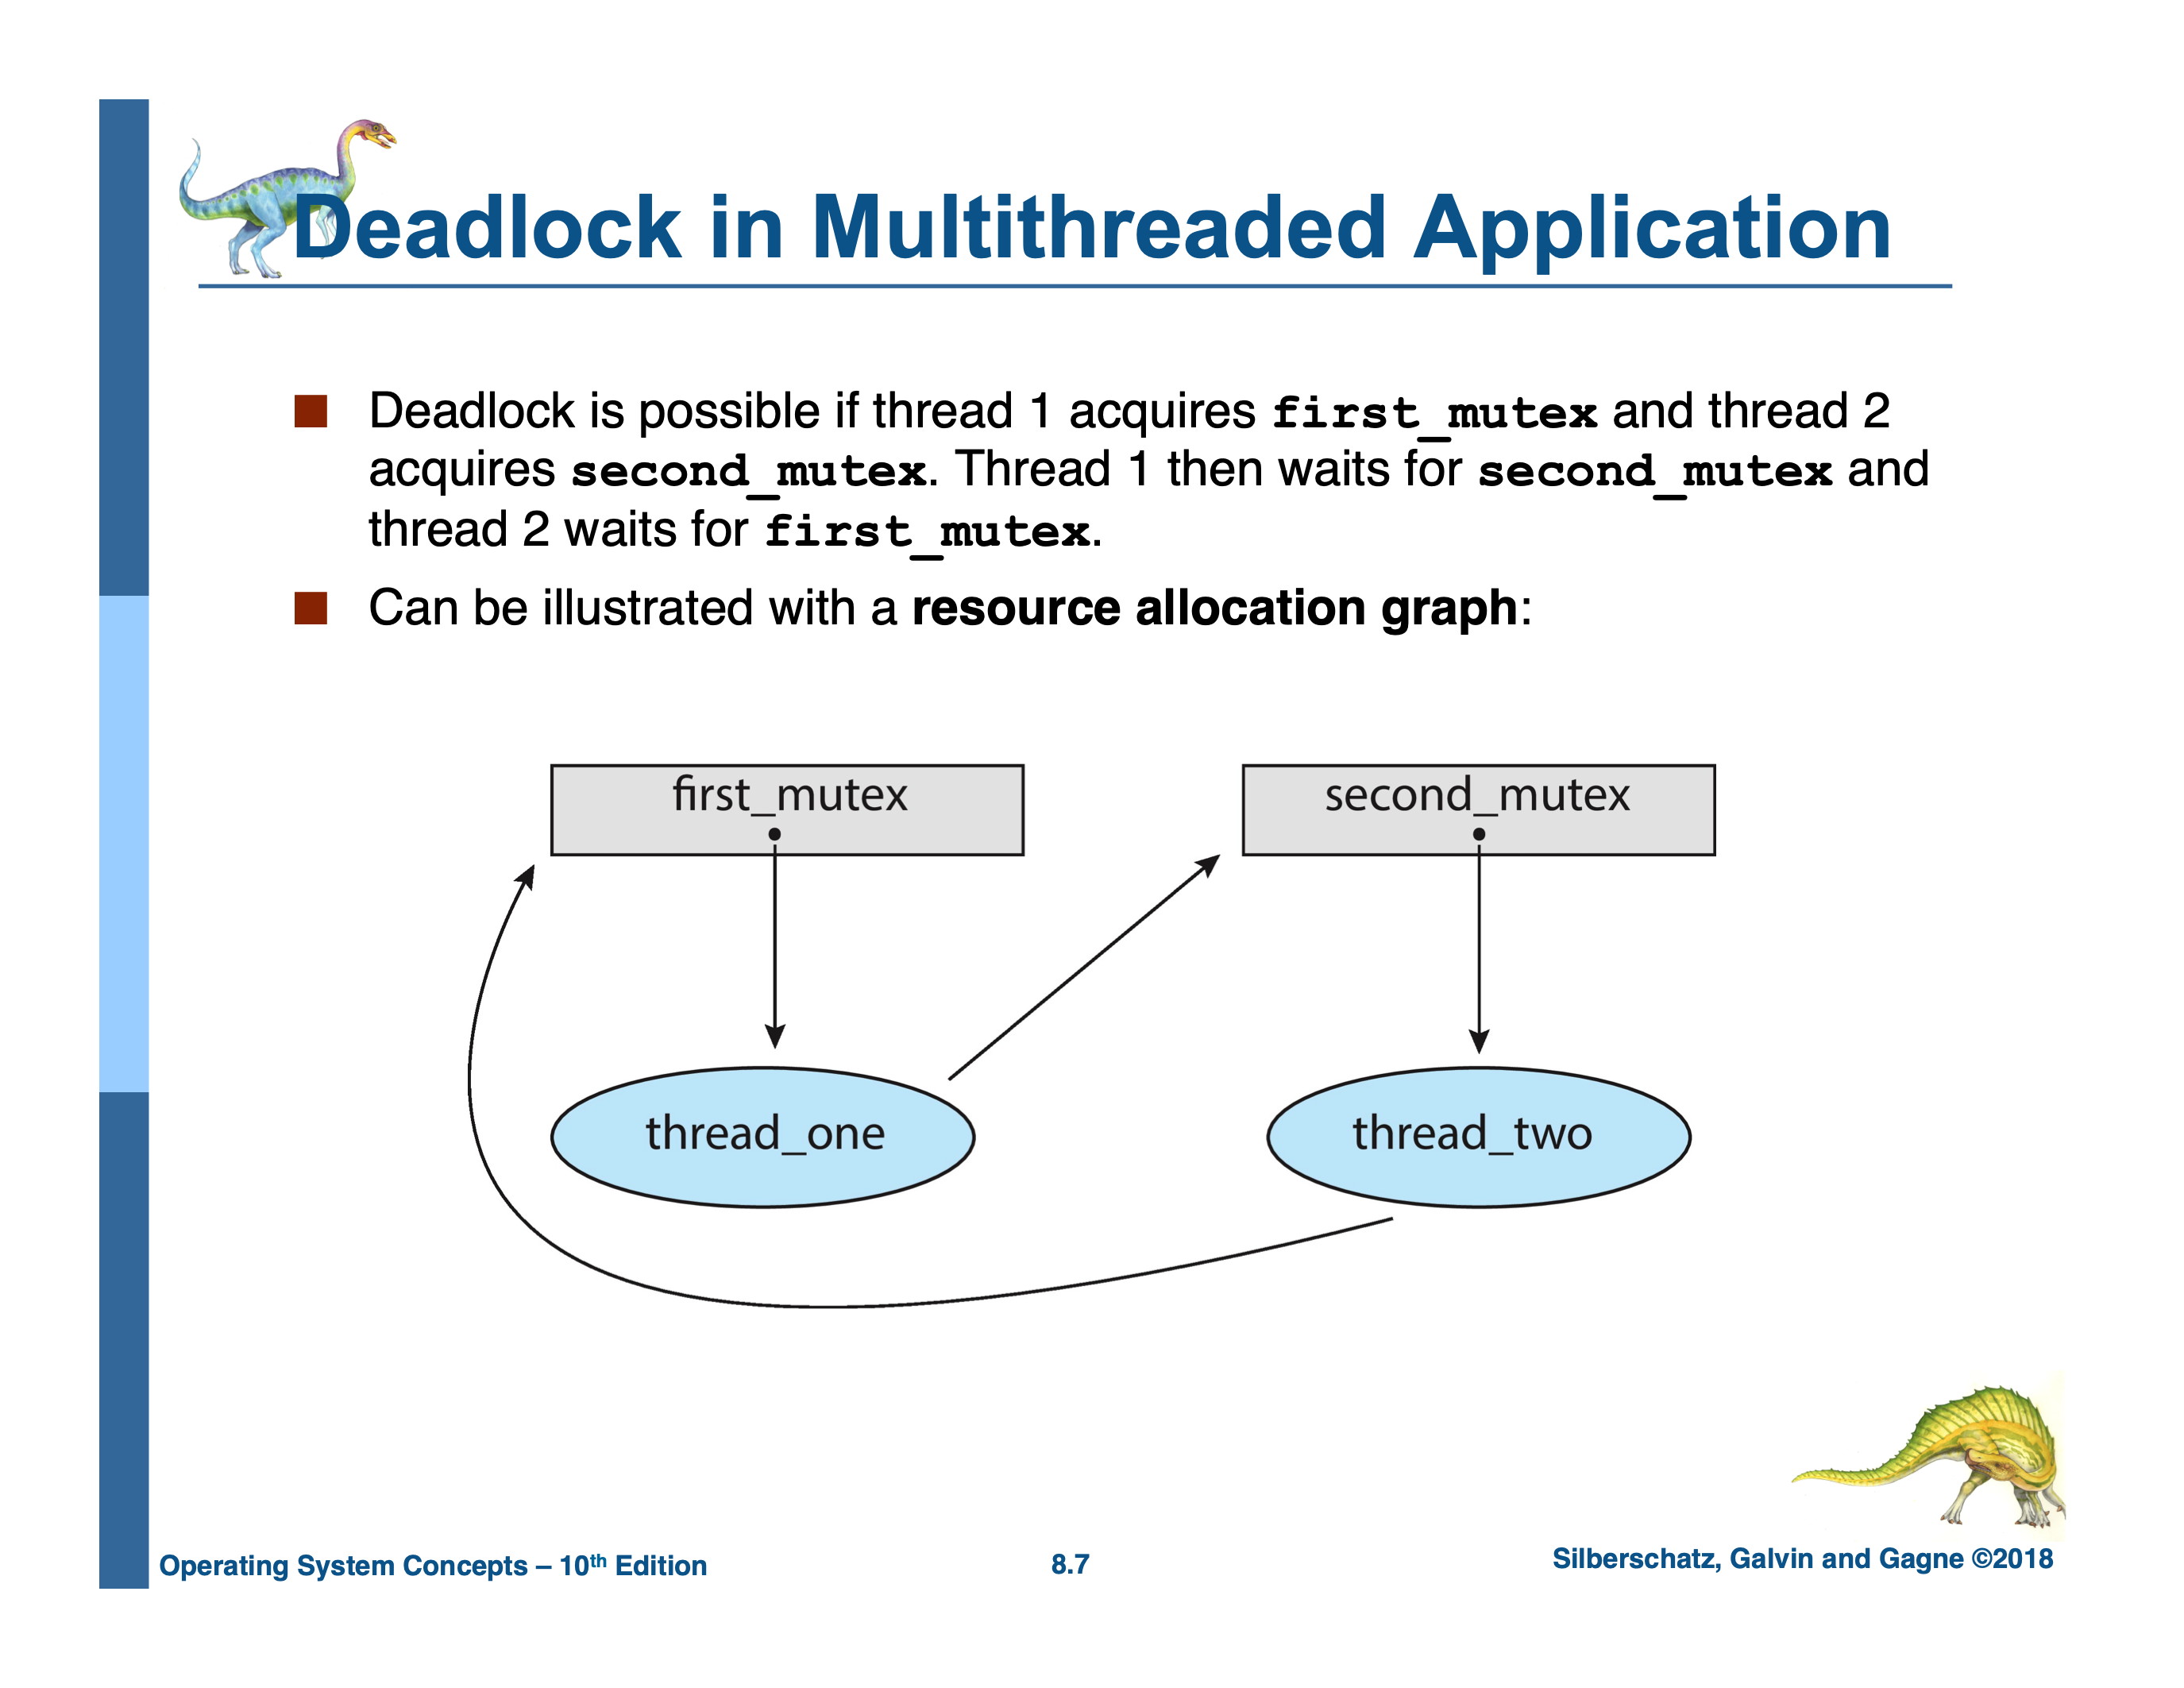 Resource Allocation Graph Depiction of The Deadlock